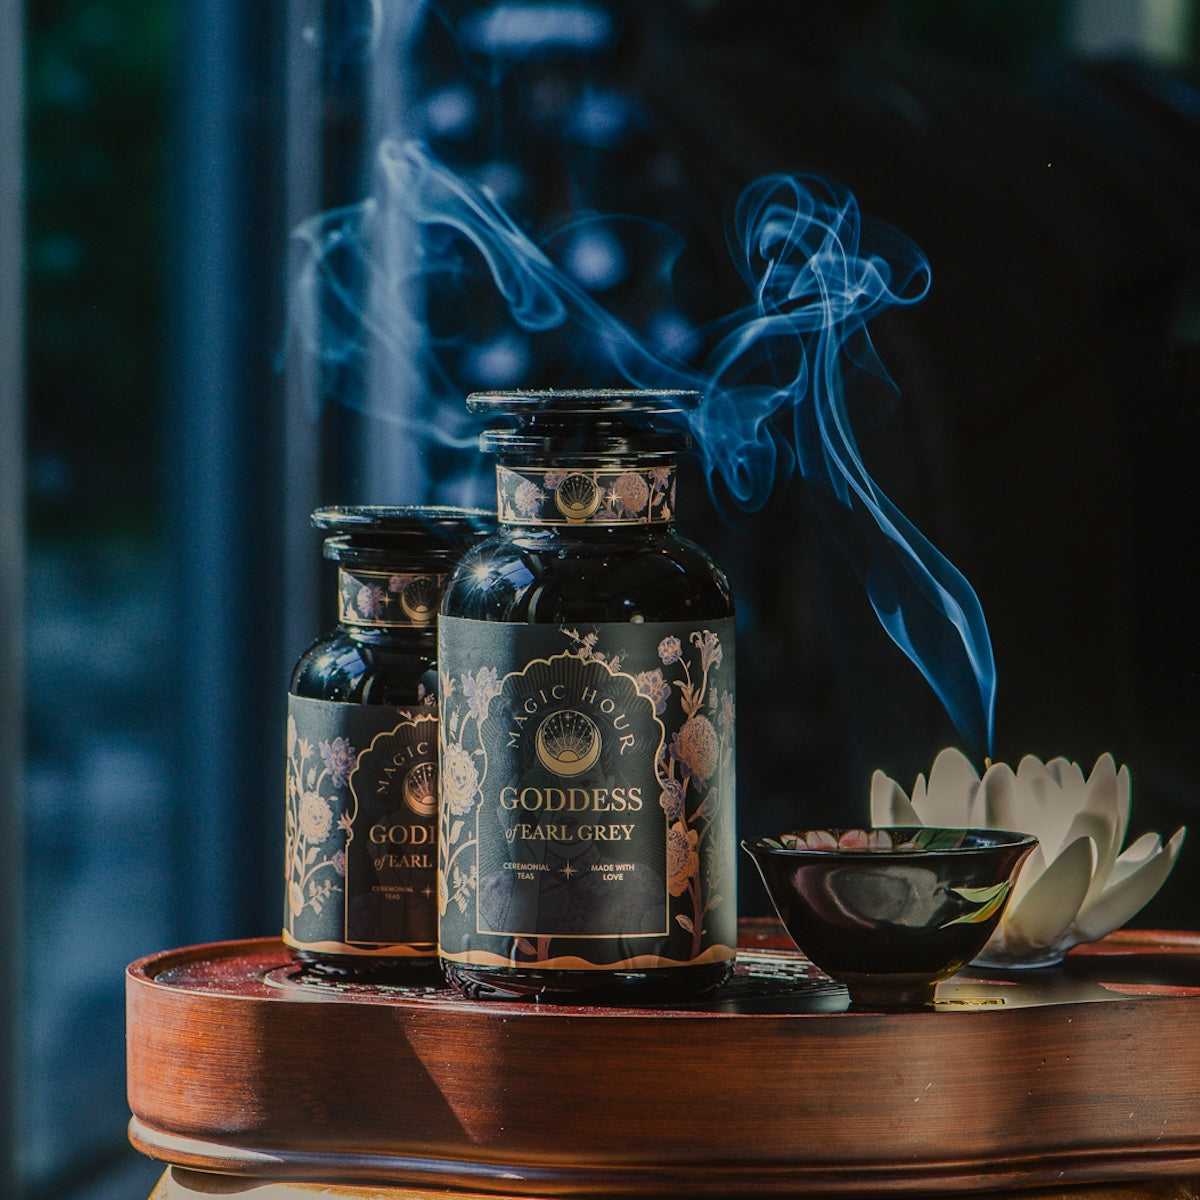 Two dark glass bottles of &quot;Goddess of Earl: Lady Luck Oriental Beauty Oolong Tea,&quot; a Magic Hour product, sit on a wooden tray adorned with intricate labels. Wisps of pale smoke rise from a ceramic dish with incense next to a white flower, creating a tranquil and aromatic atmosphere, perfect for savoring this organic tea.